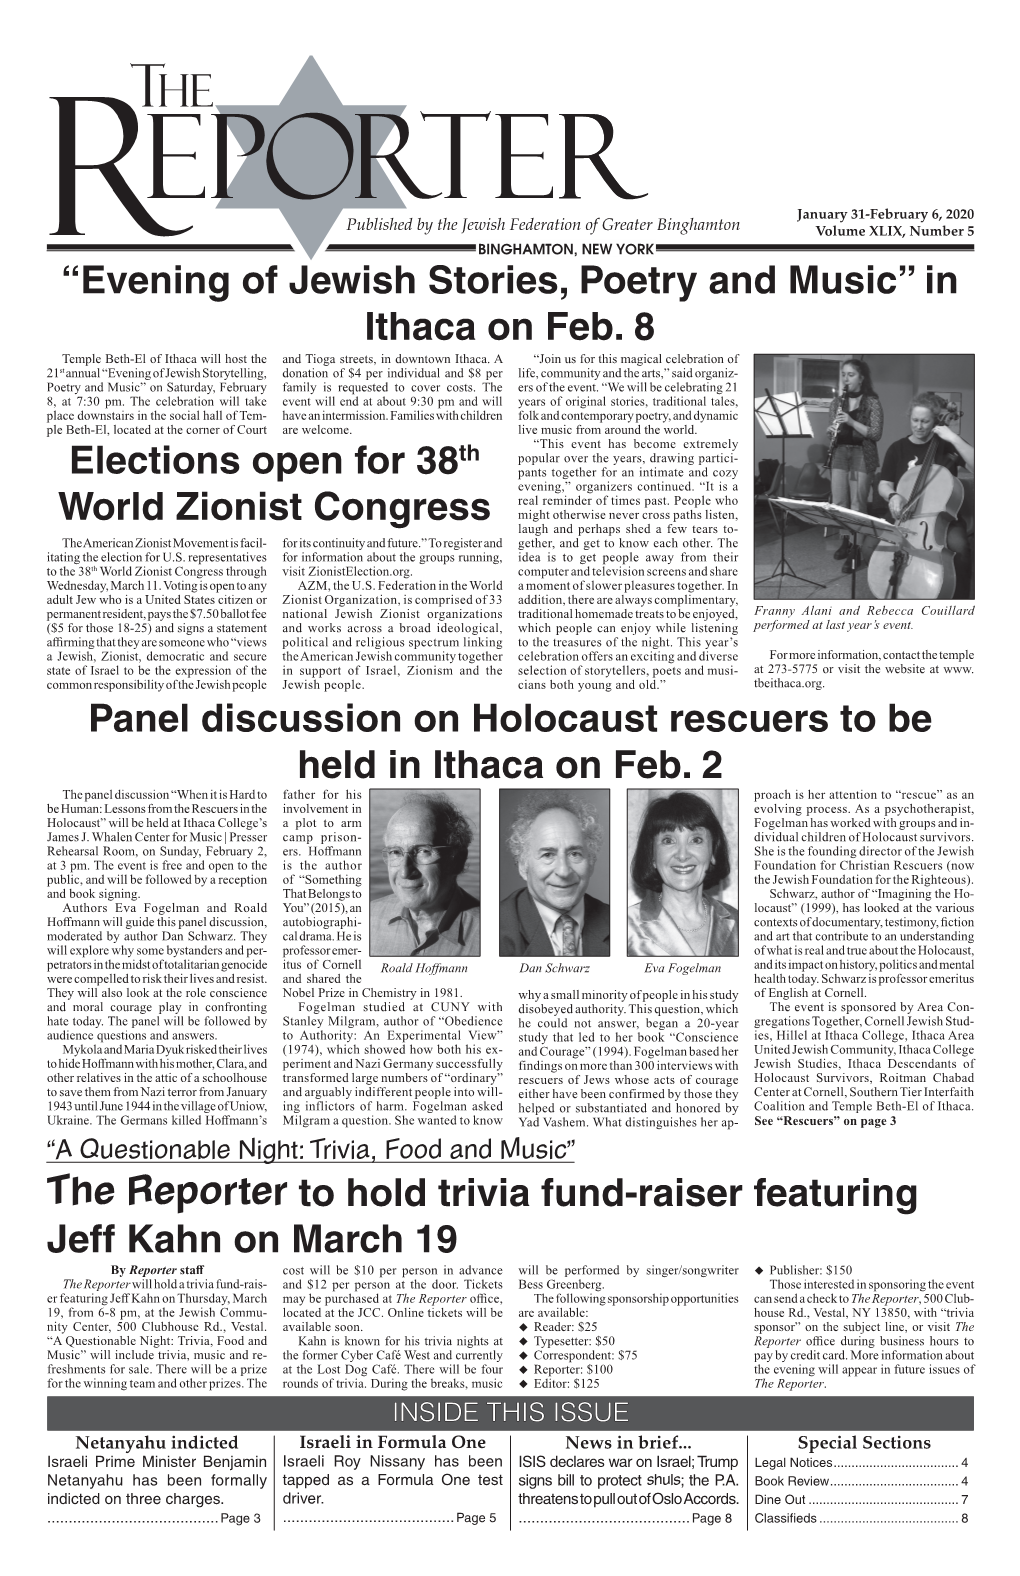 Elections Open for 38Th World Zionist Congress Panel Discussion on Holocaust Rescuers to Be Held in Ithaca on Feb. 2 “Evening